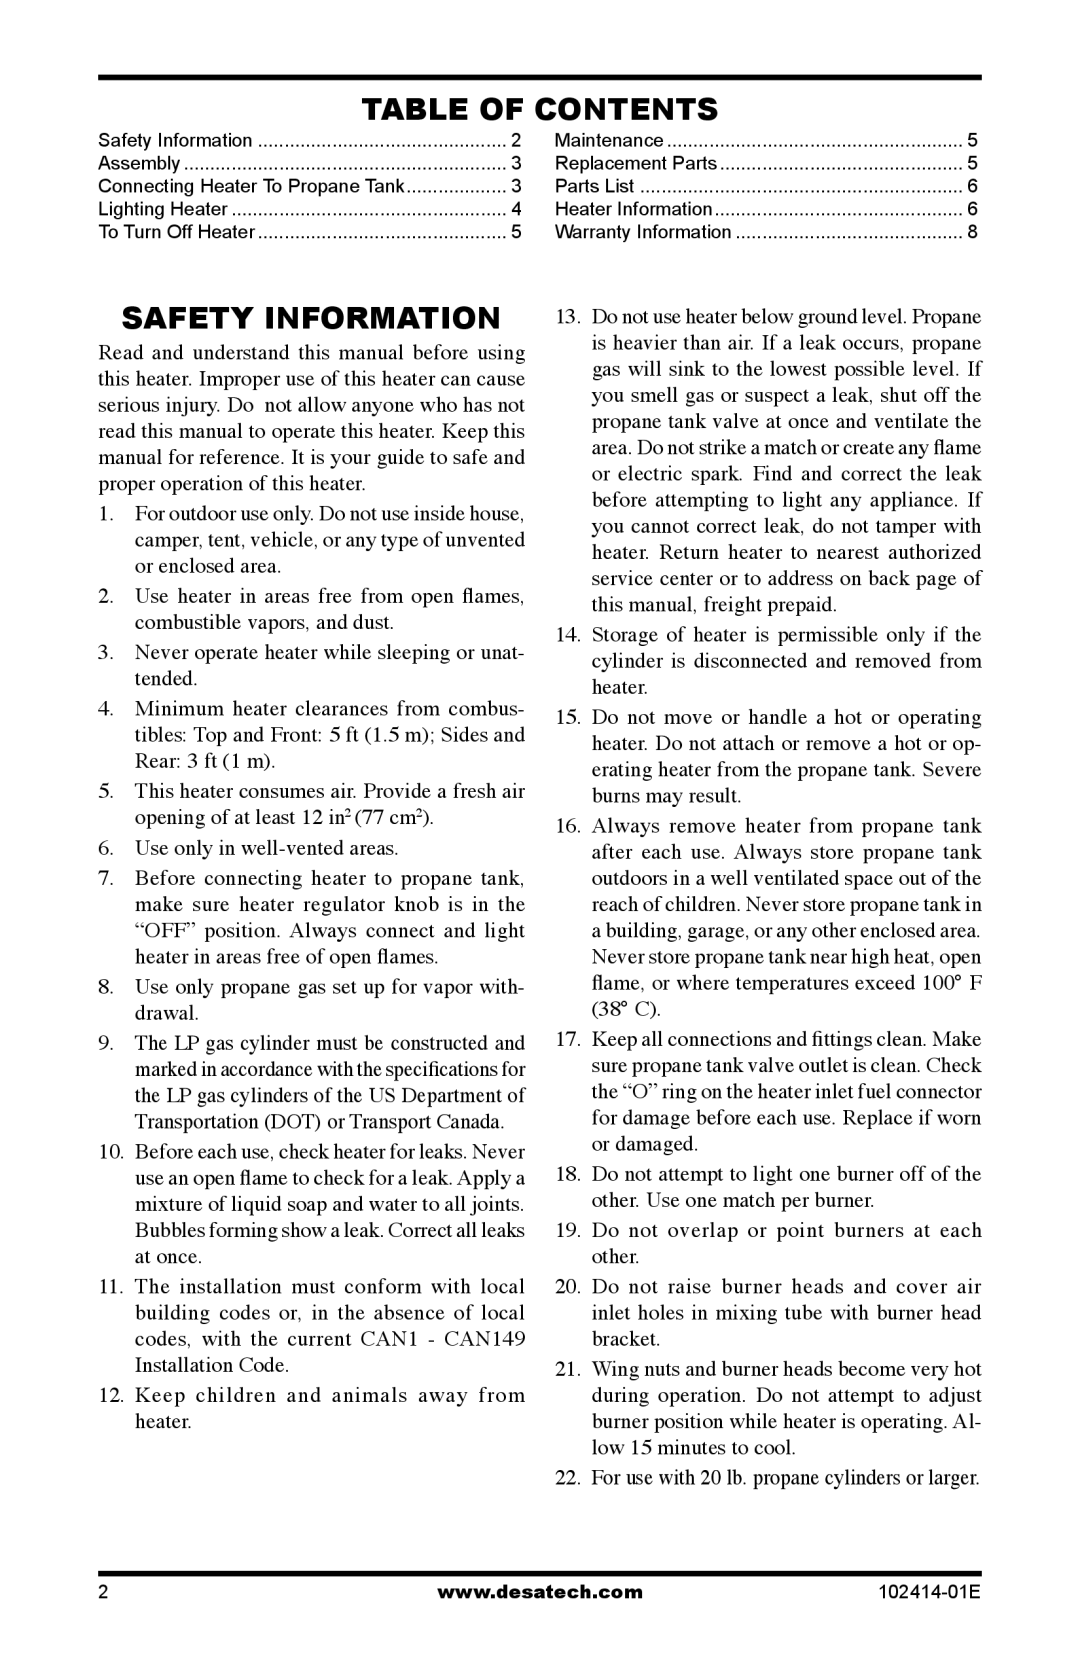 Desa CHD24B, TTC24B owner manual Table Of Contents, Safety Information 